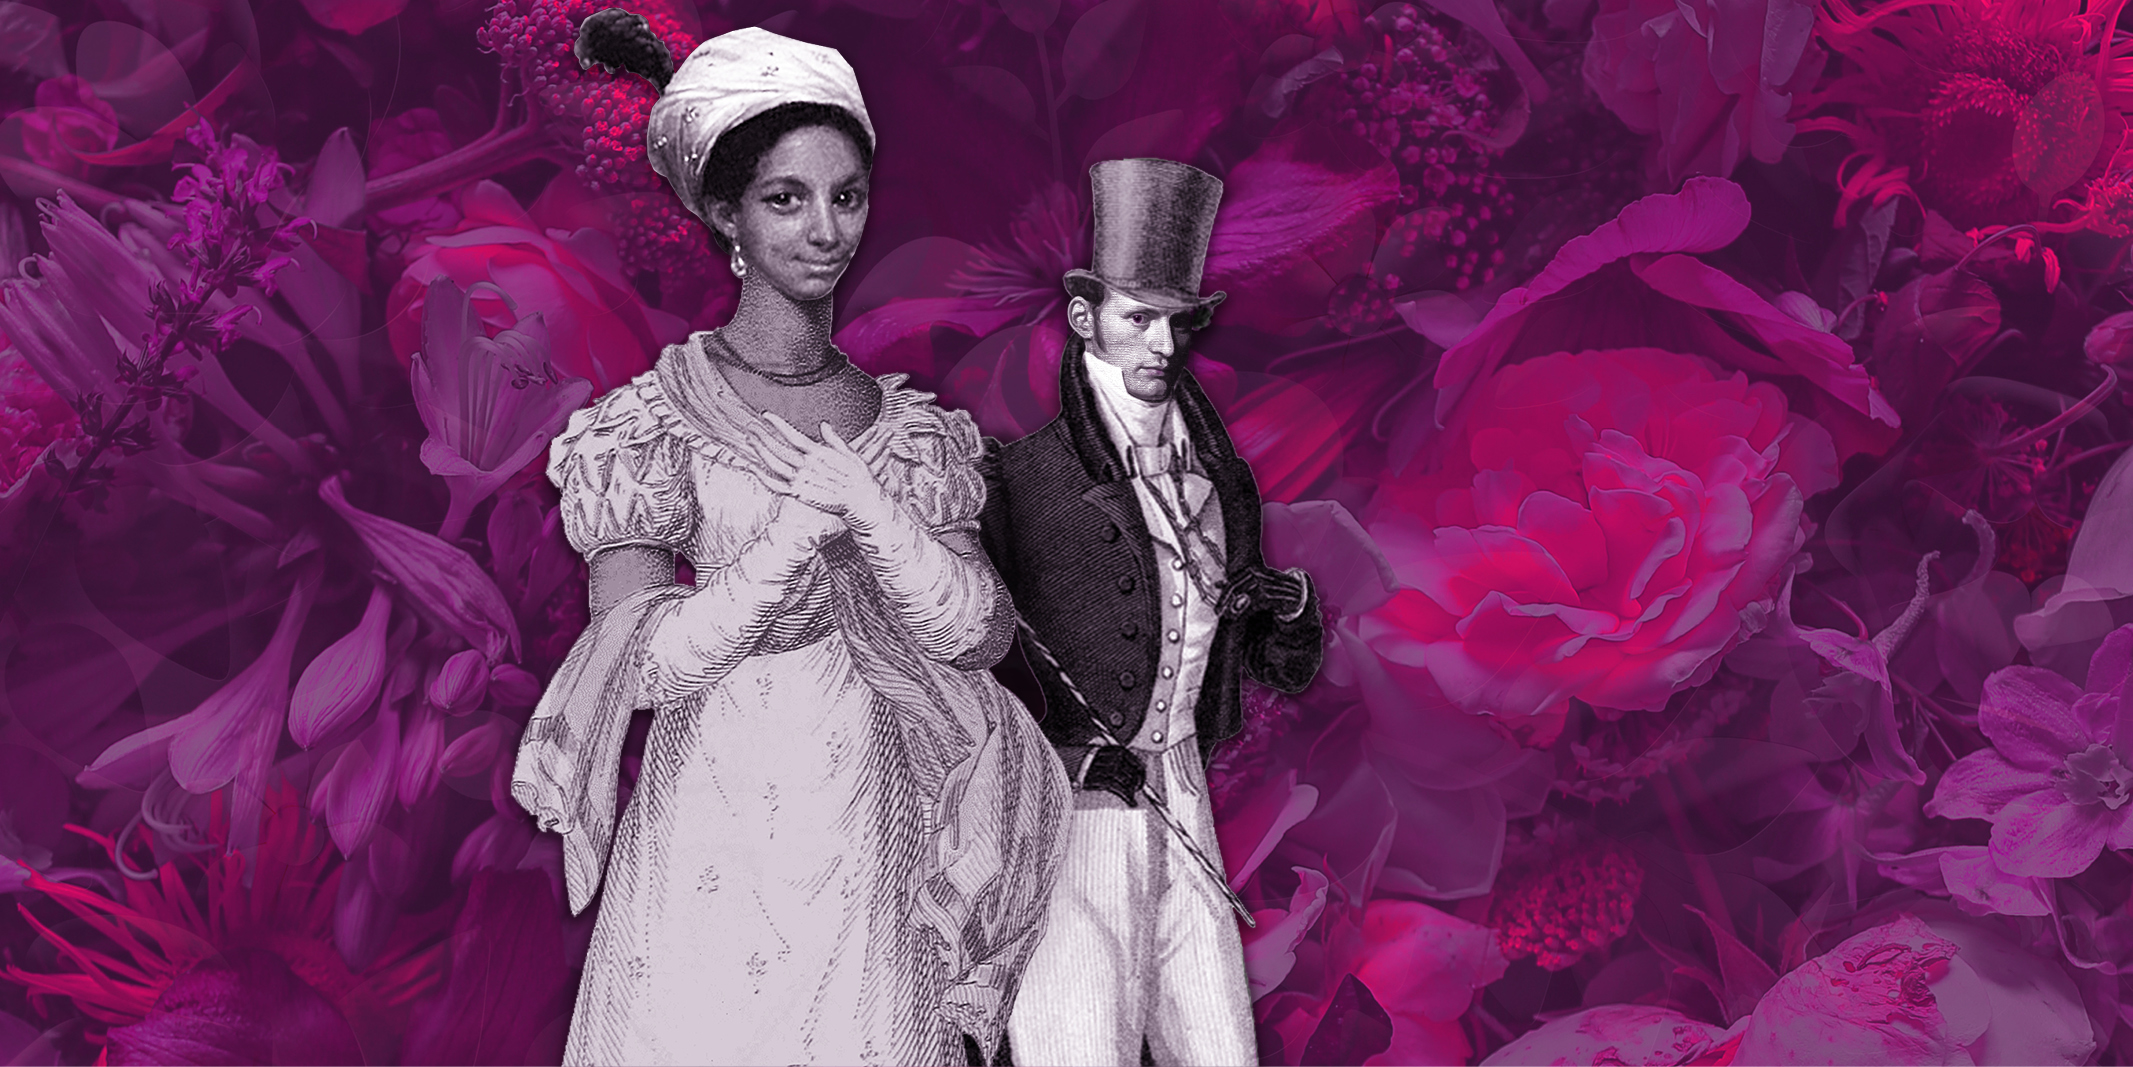 A woman and a man in 19th century clothing superimposed over an illustration of purple flowers